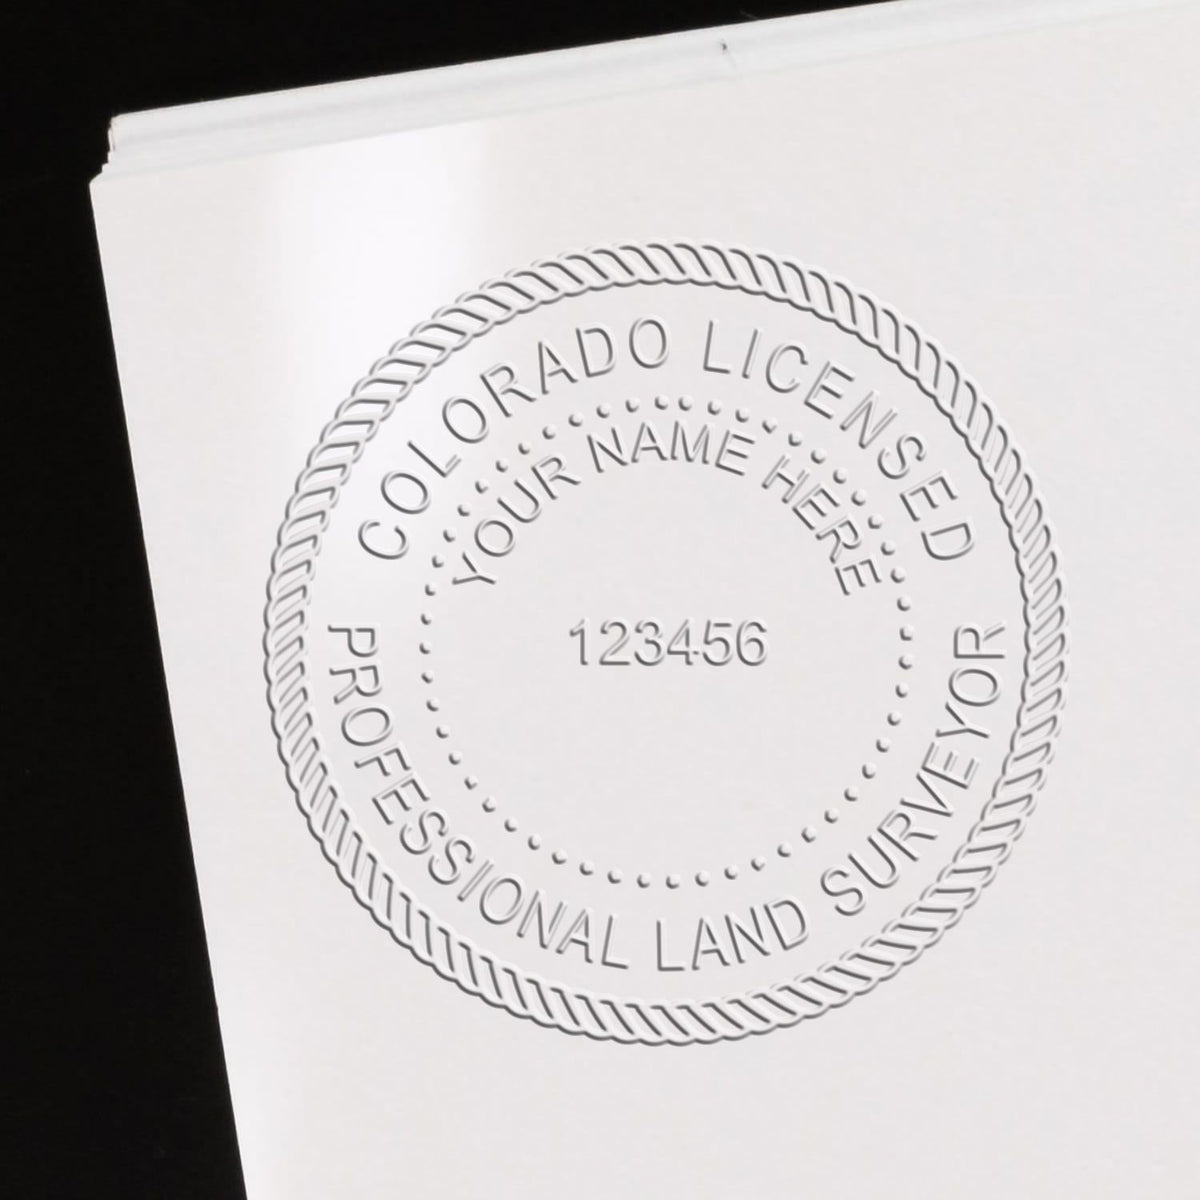 The Long Reach Colorado Land Surveyor Seal stamp impression comes to life with a crisp, detailed photo on paper - showcasing true professional quality.